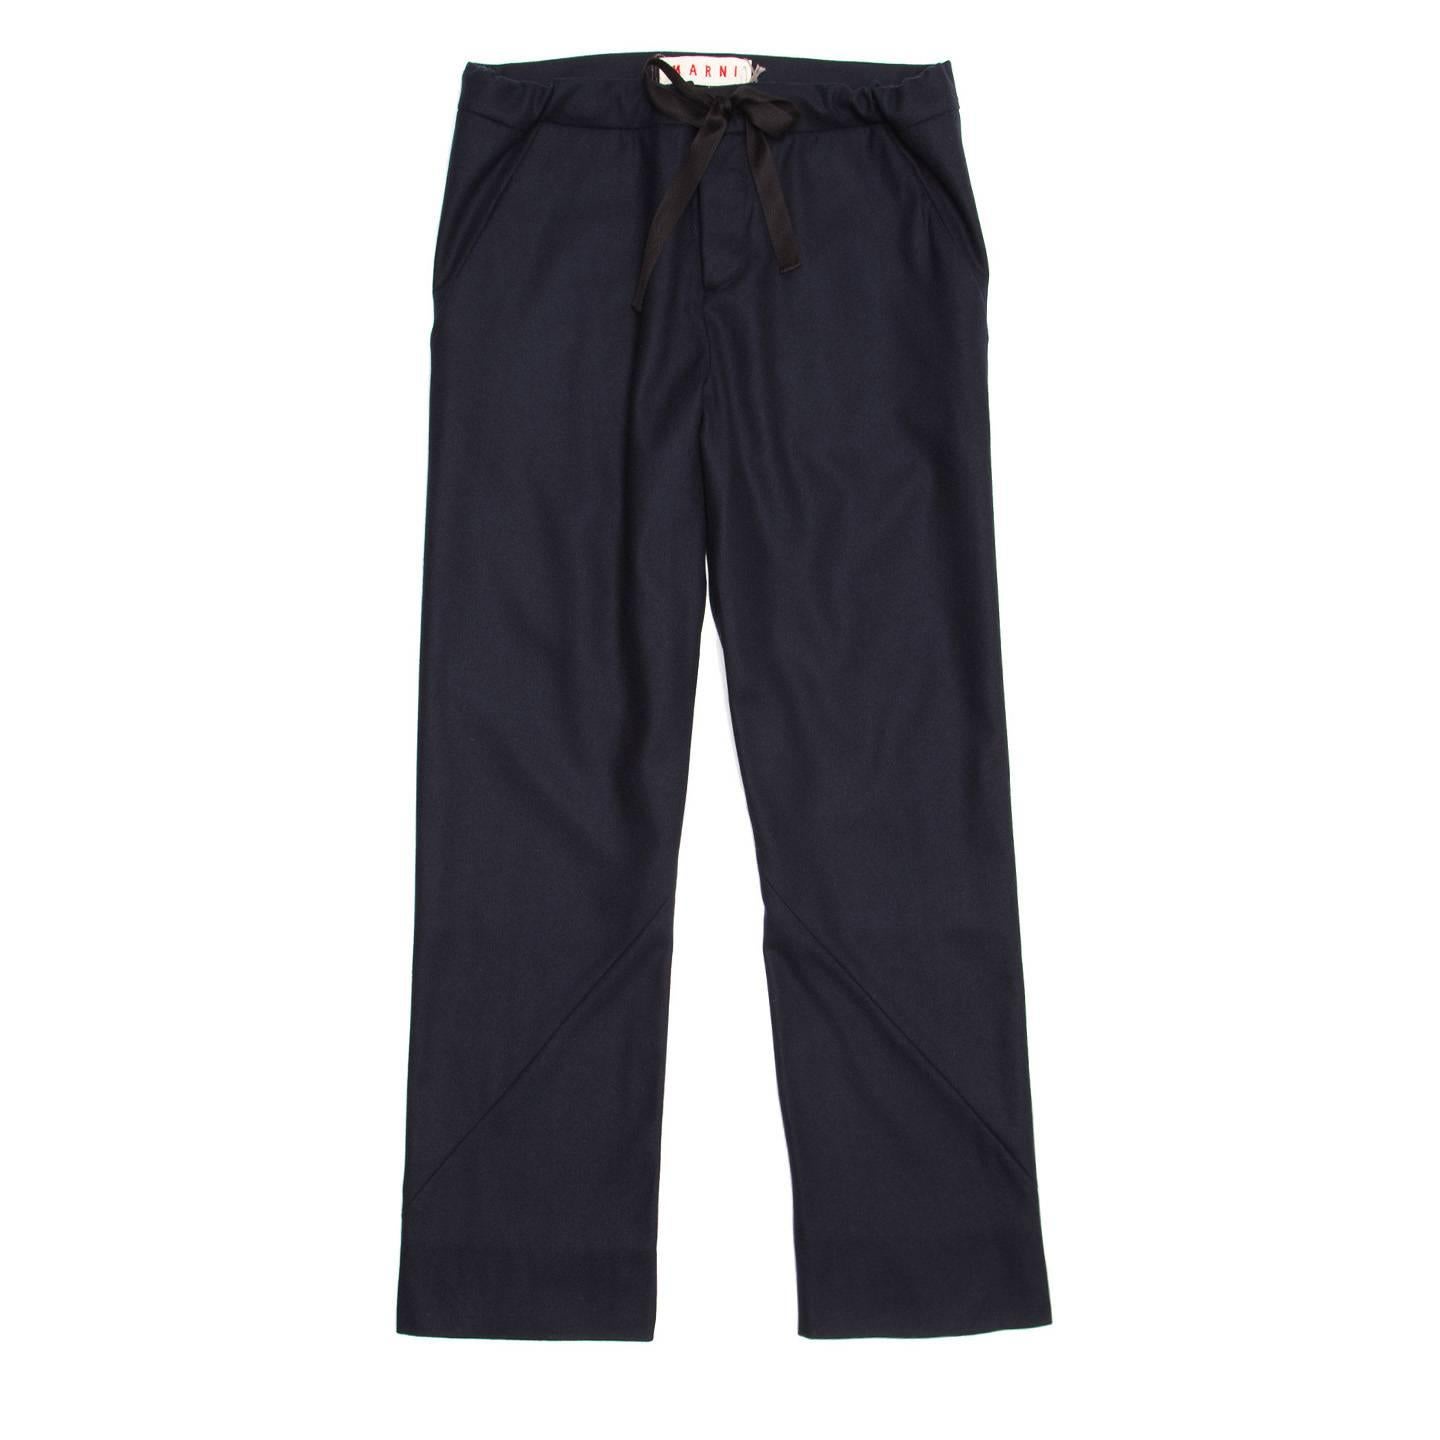 Navy virgin wool blend light flanel trousers with a straight leg fit. Front and back are flat, a ribbon drawstring makes the waist adjustable and enriches the front, while a seam detail follows the slash pockets line and turns around the legs.

Size